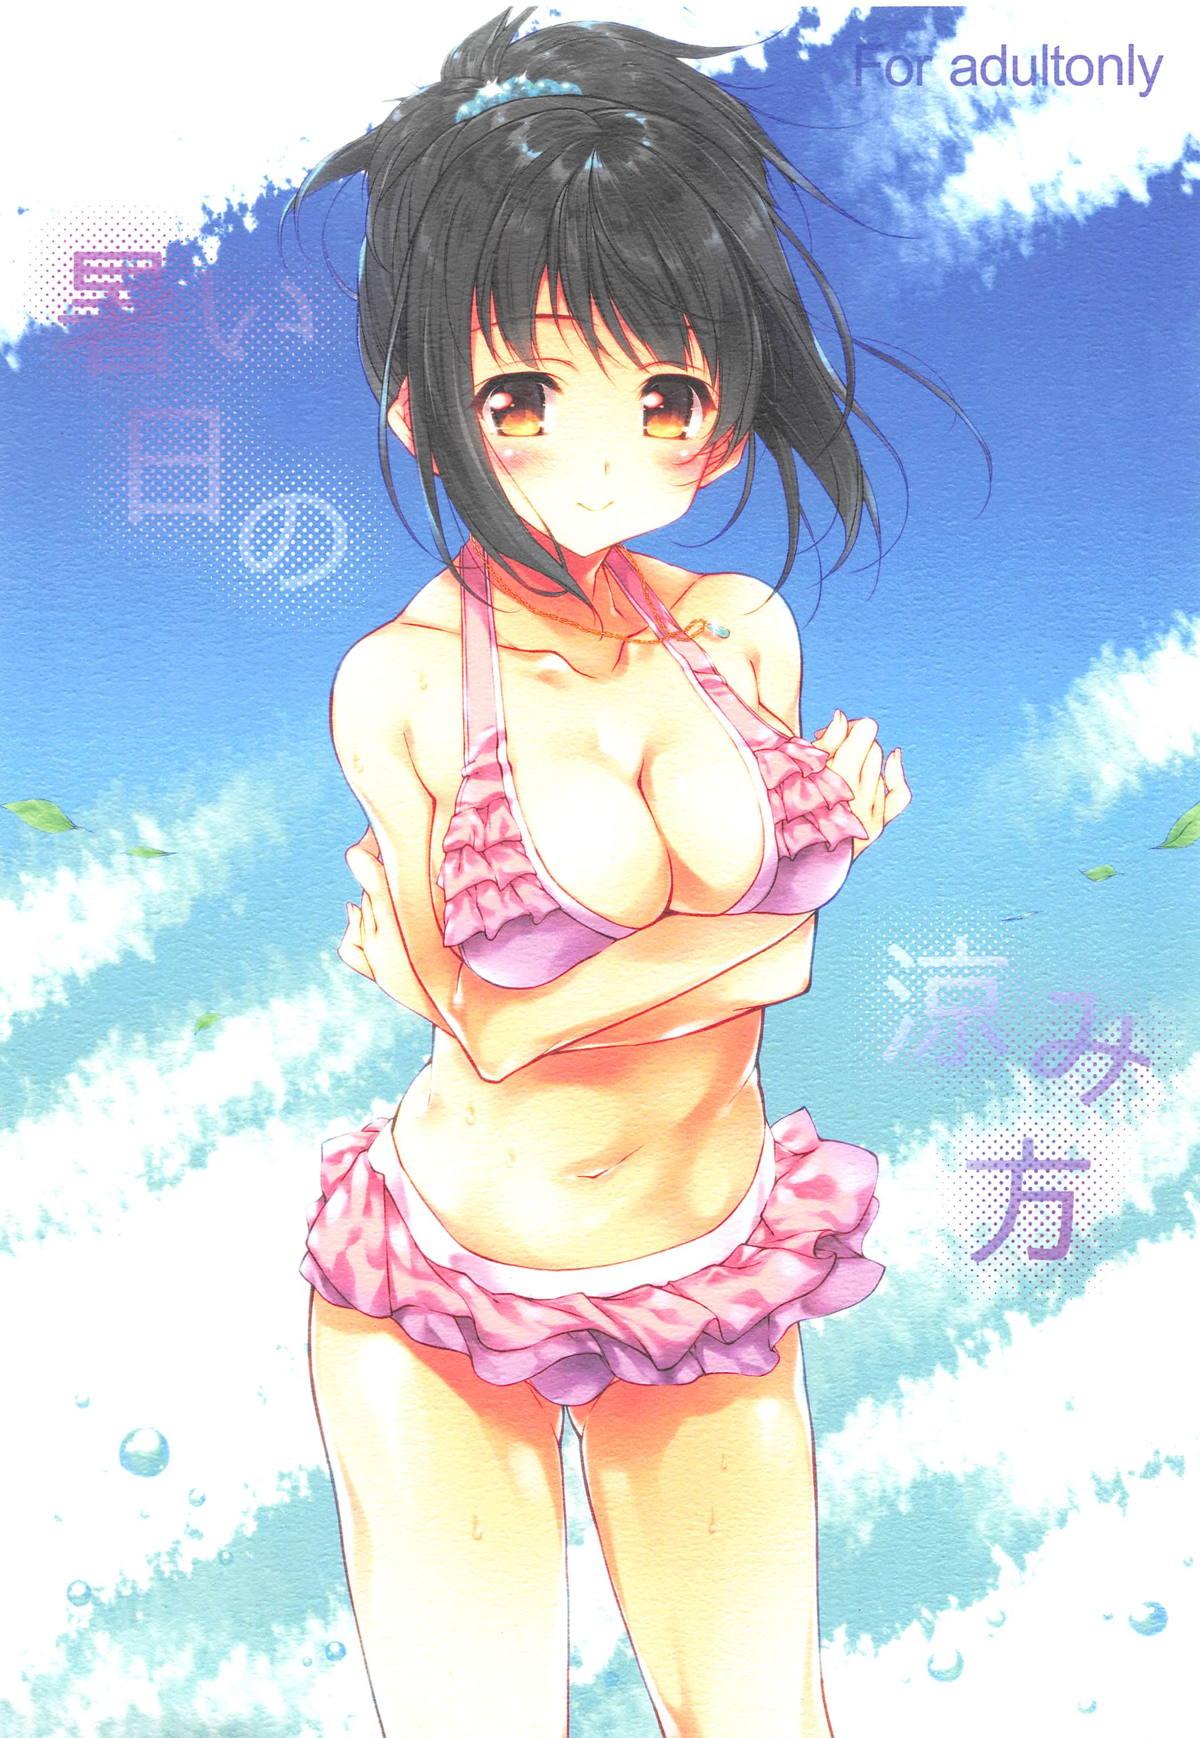 Atsui Hi no Suzumikata | How to Cool Off on a Hot Day 0